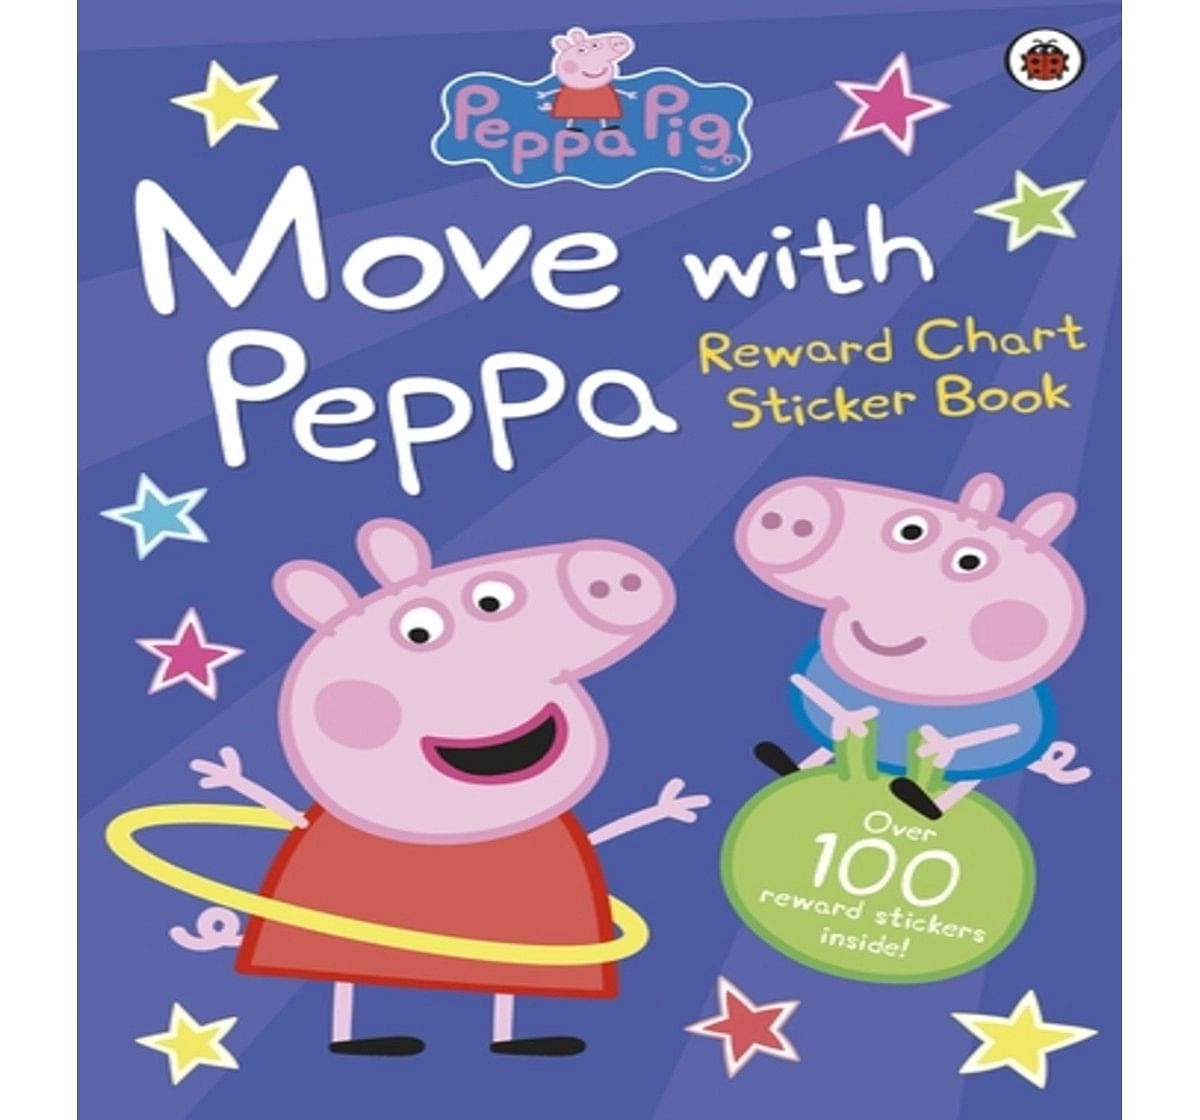 Peppa Pig : Move with Peppa, 16 Pages Book by Ladybird, Paperback